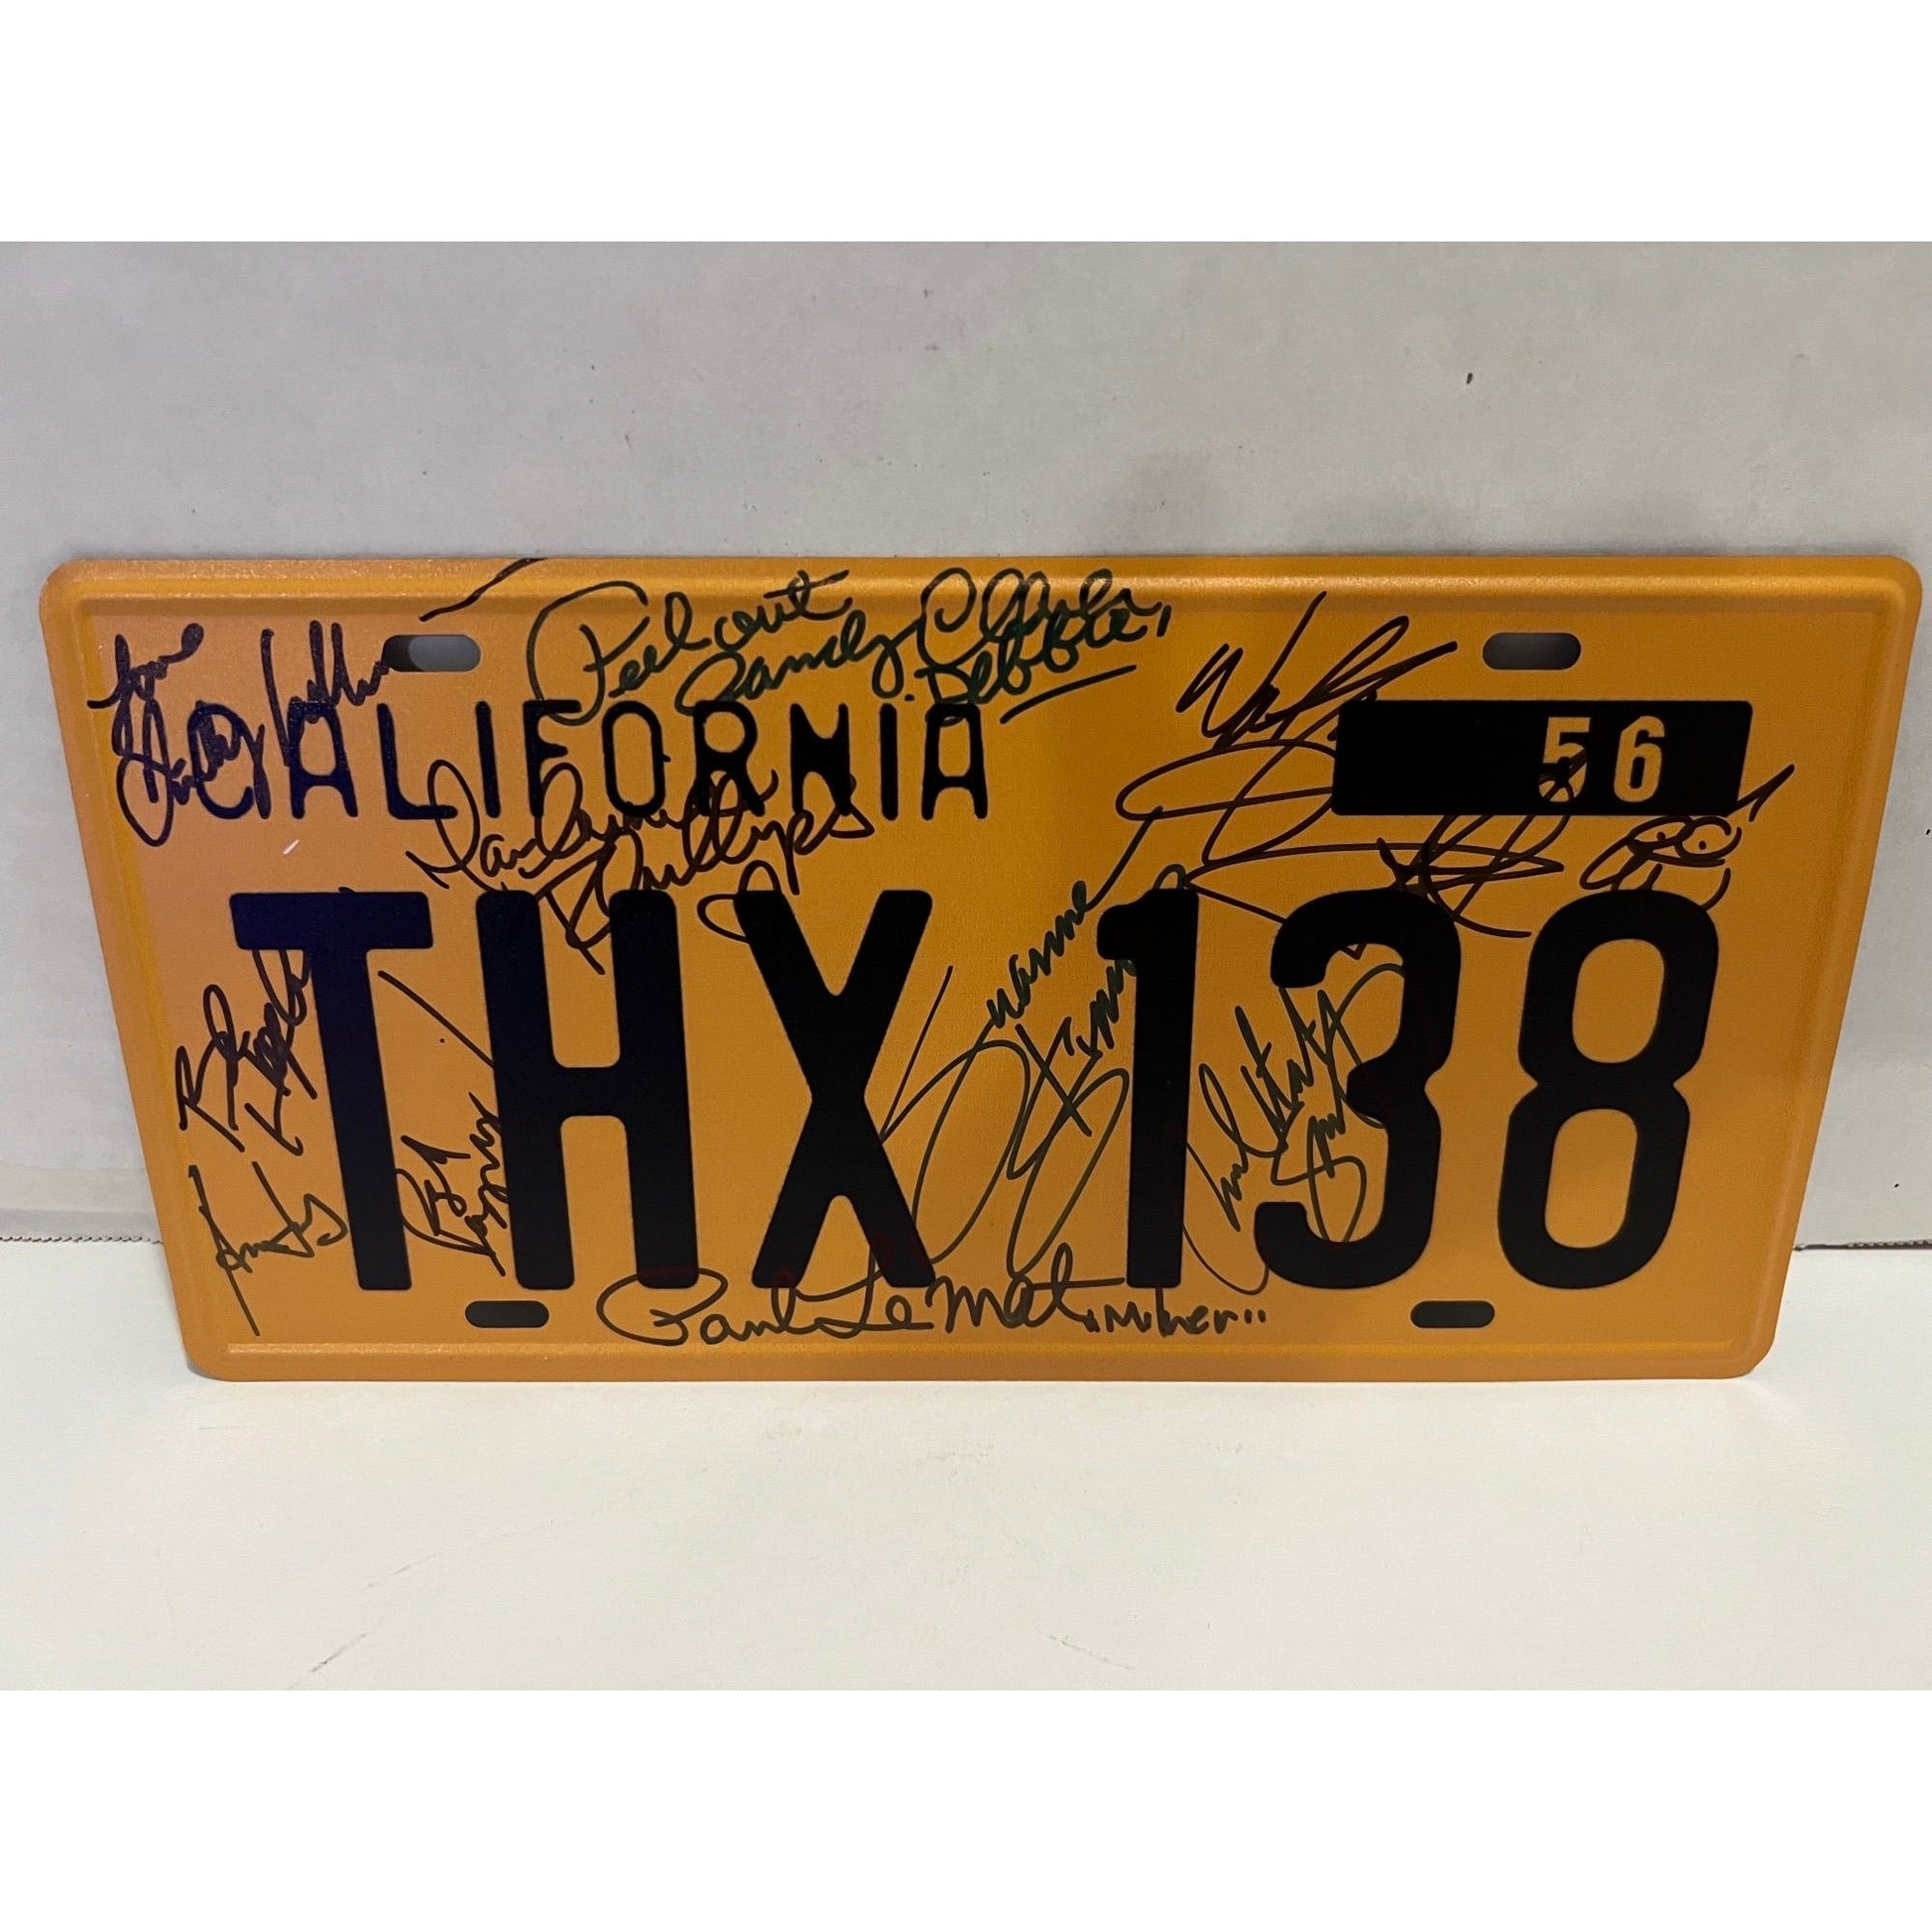 American Graffiti  original licence plate Hand-signed by: Bo Hopkins, Cindy Williams, Candy Clark, Harrison Ford and more